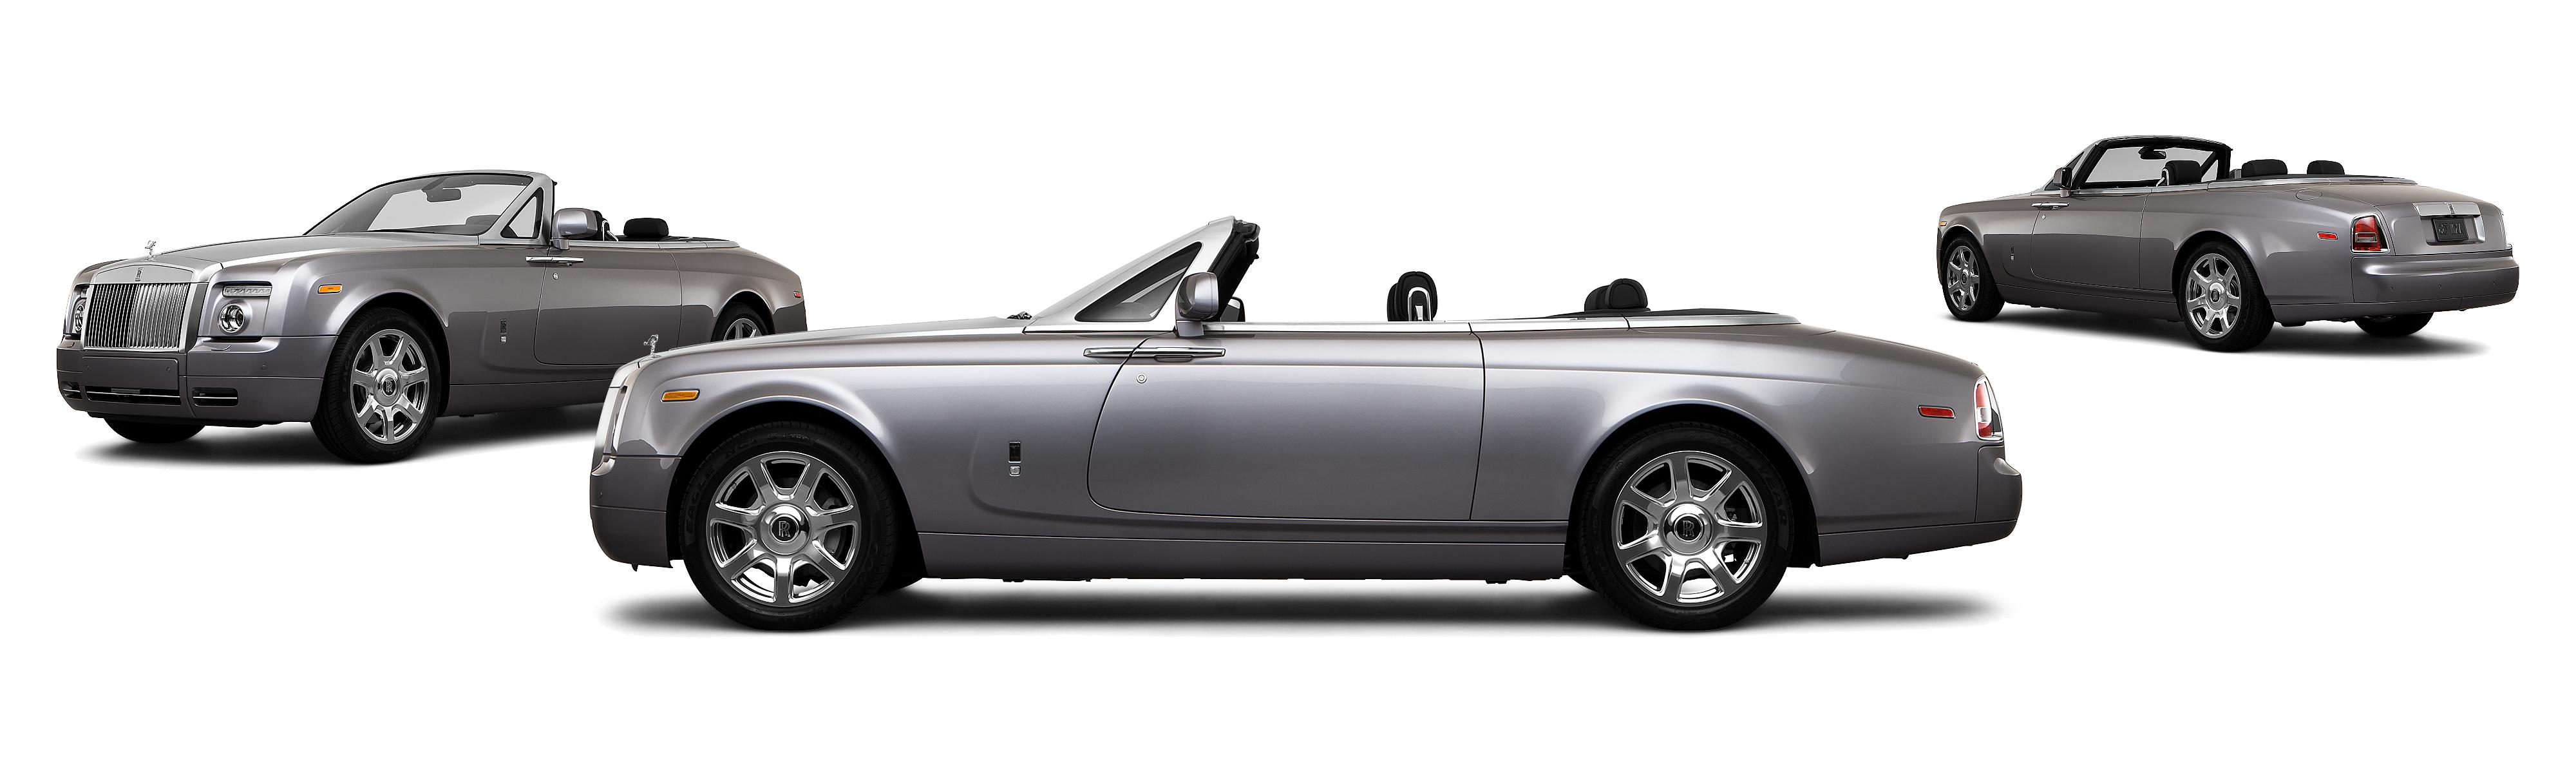 2010 Rolls-Royce Phantom Drophead Coupe 2dr Convertible - Research -  GrooveCar